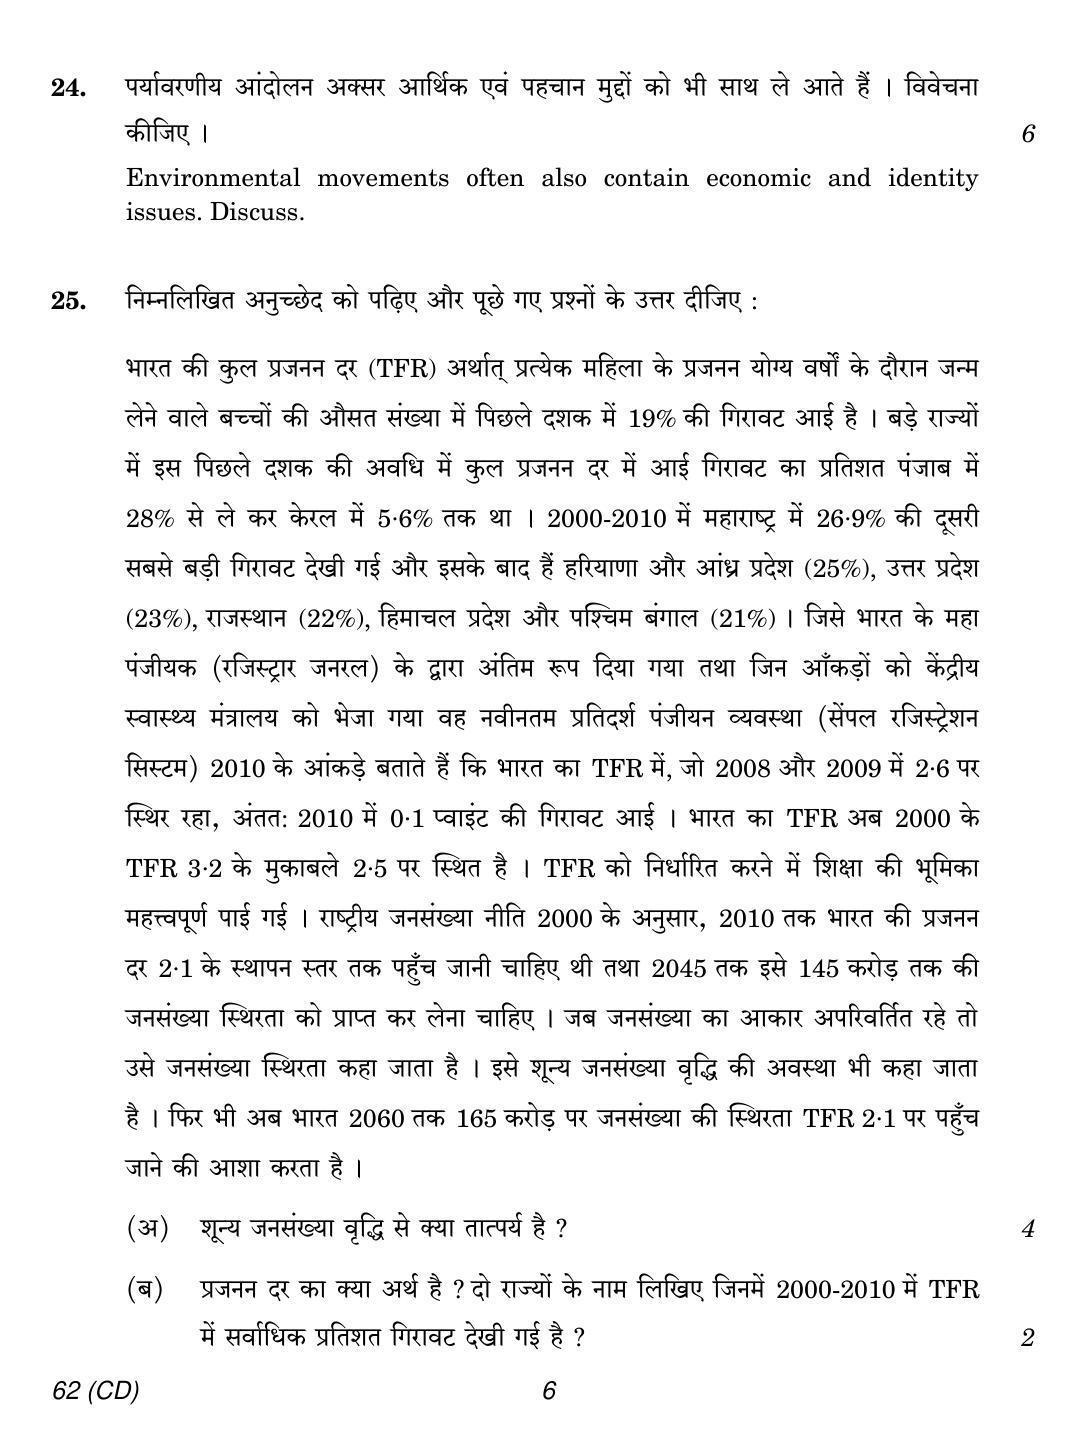 CBSE Class 12 62 SOCIOLOGY CD 2018 Question Paper - Page 6